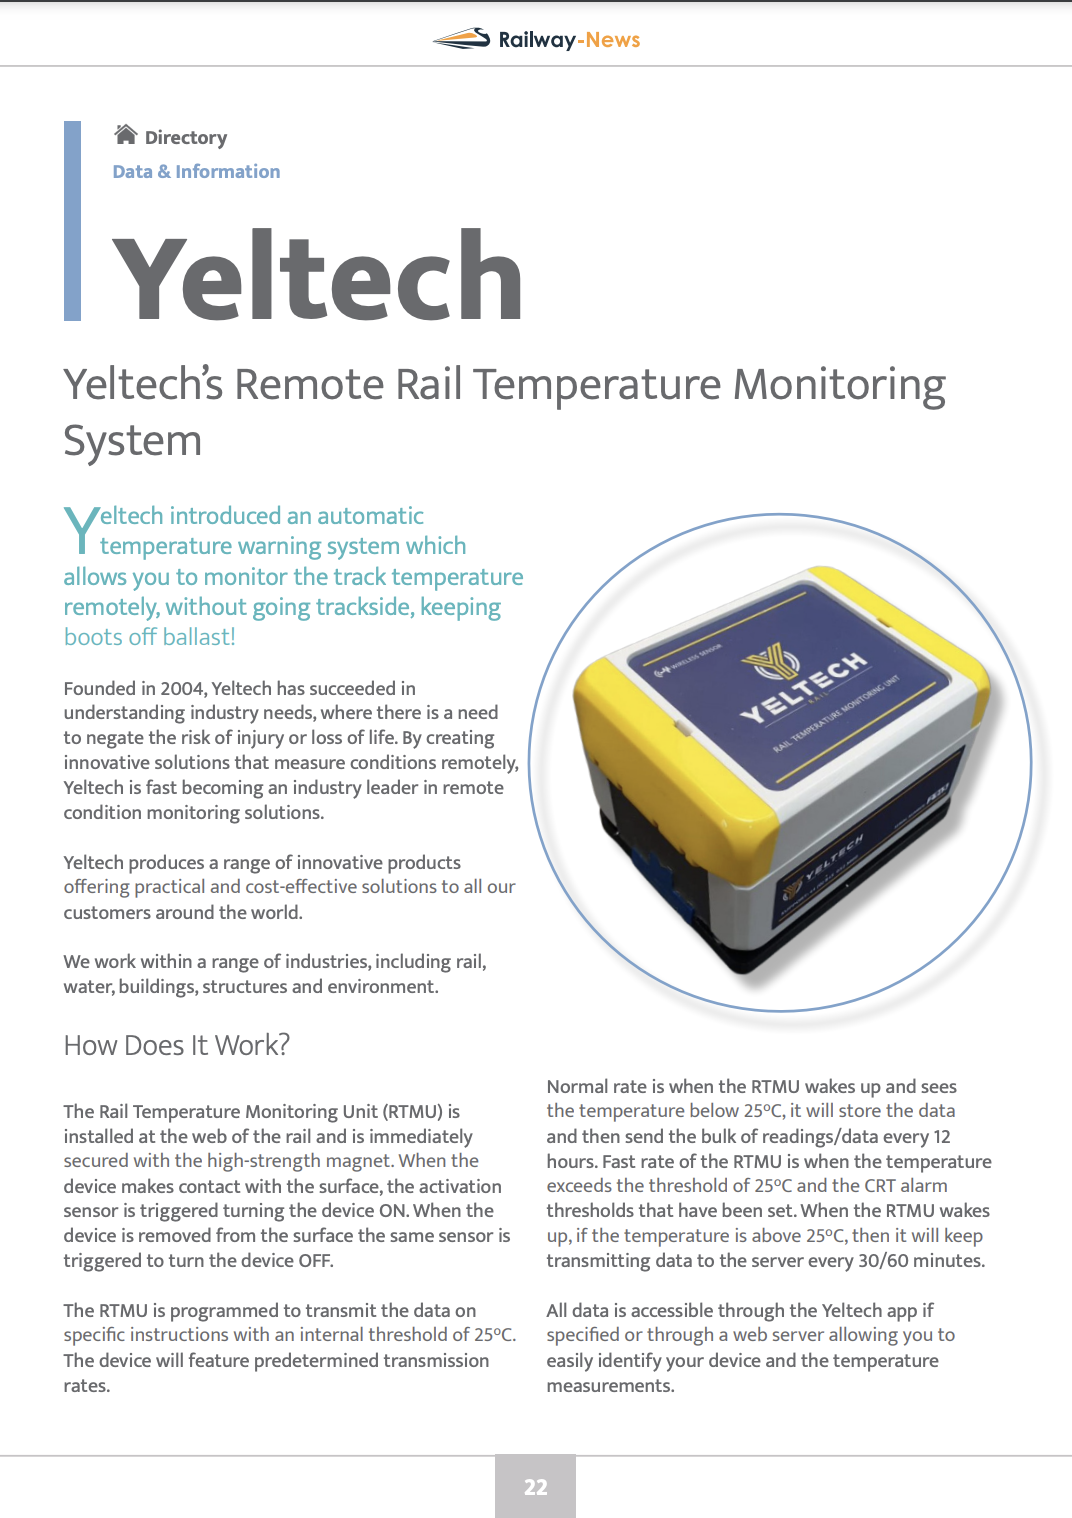 Yeltech's Remote Rail Temperature Monitoring System